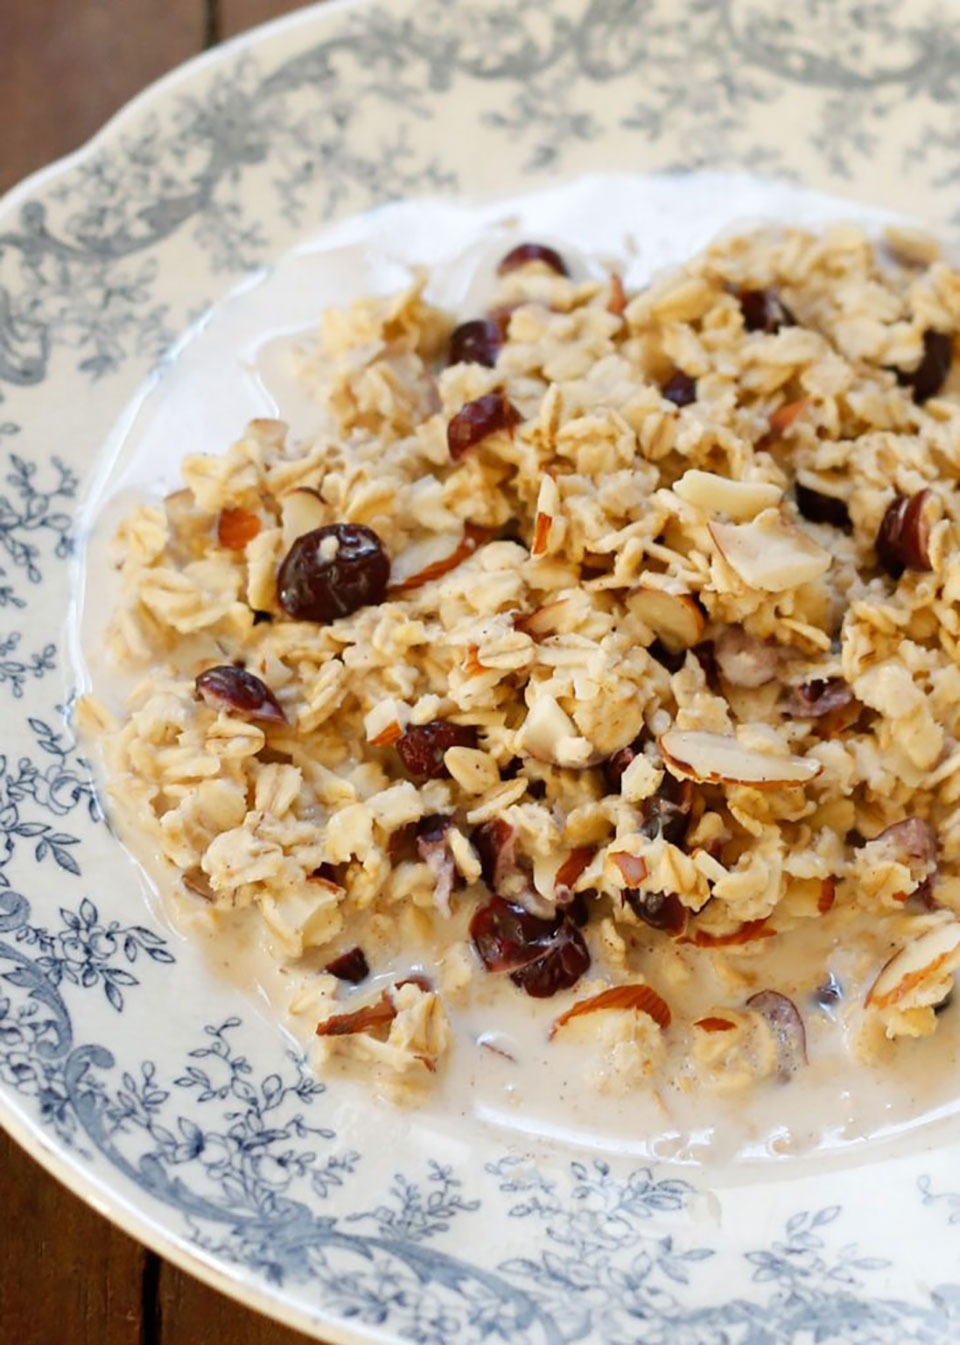 17 Must-Try Ideas for Crock-Pot Oatmeal | Eat This Not That